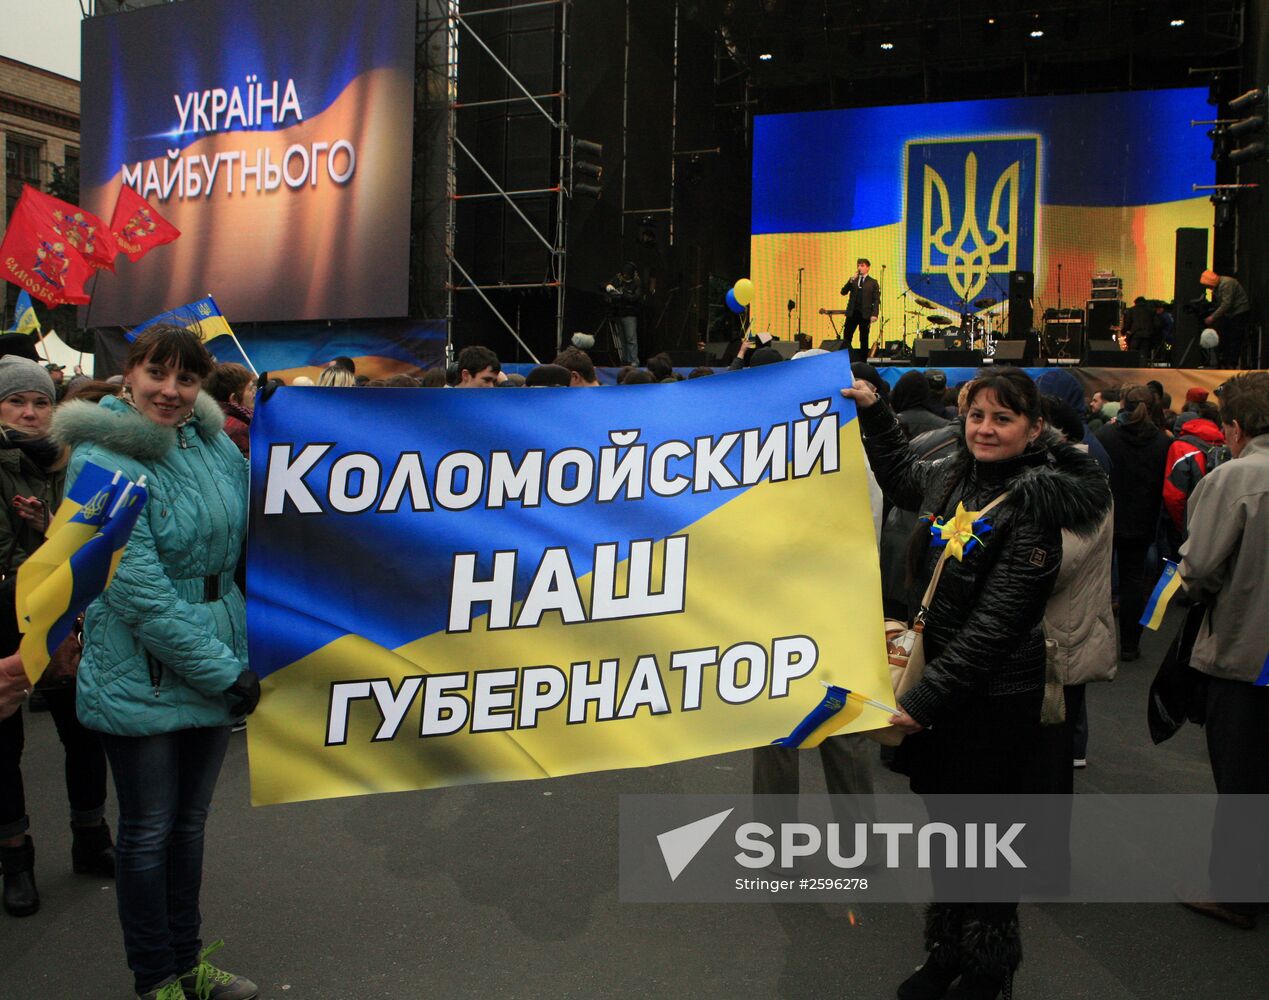 Rally for the united Ukraine in Dnipropetrovsk